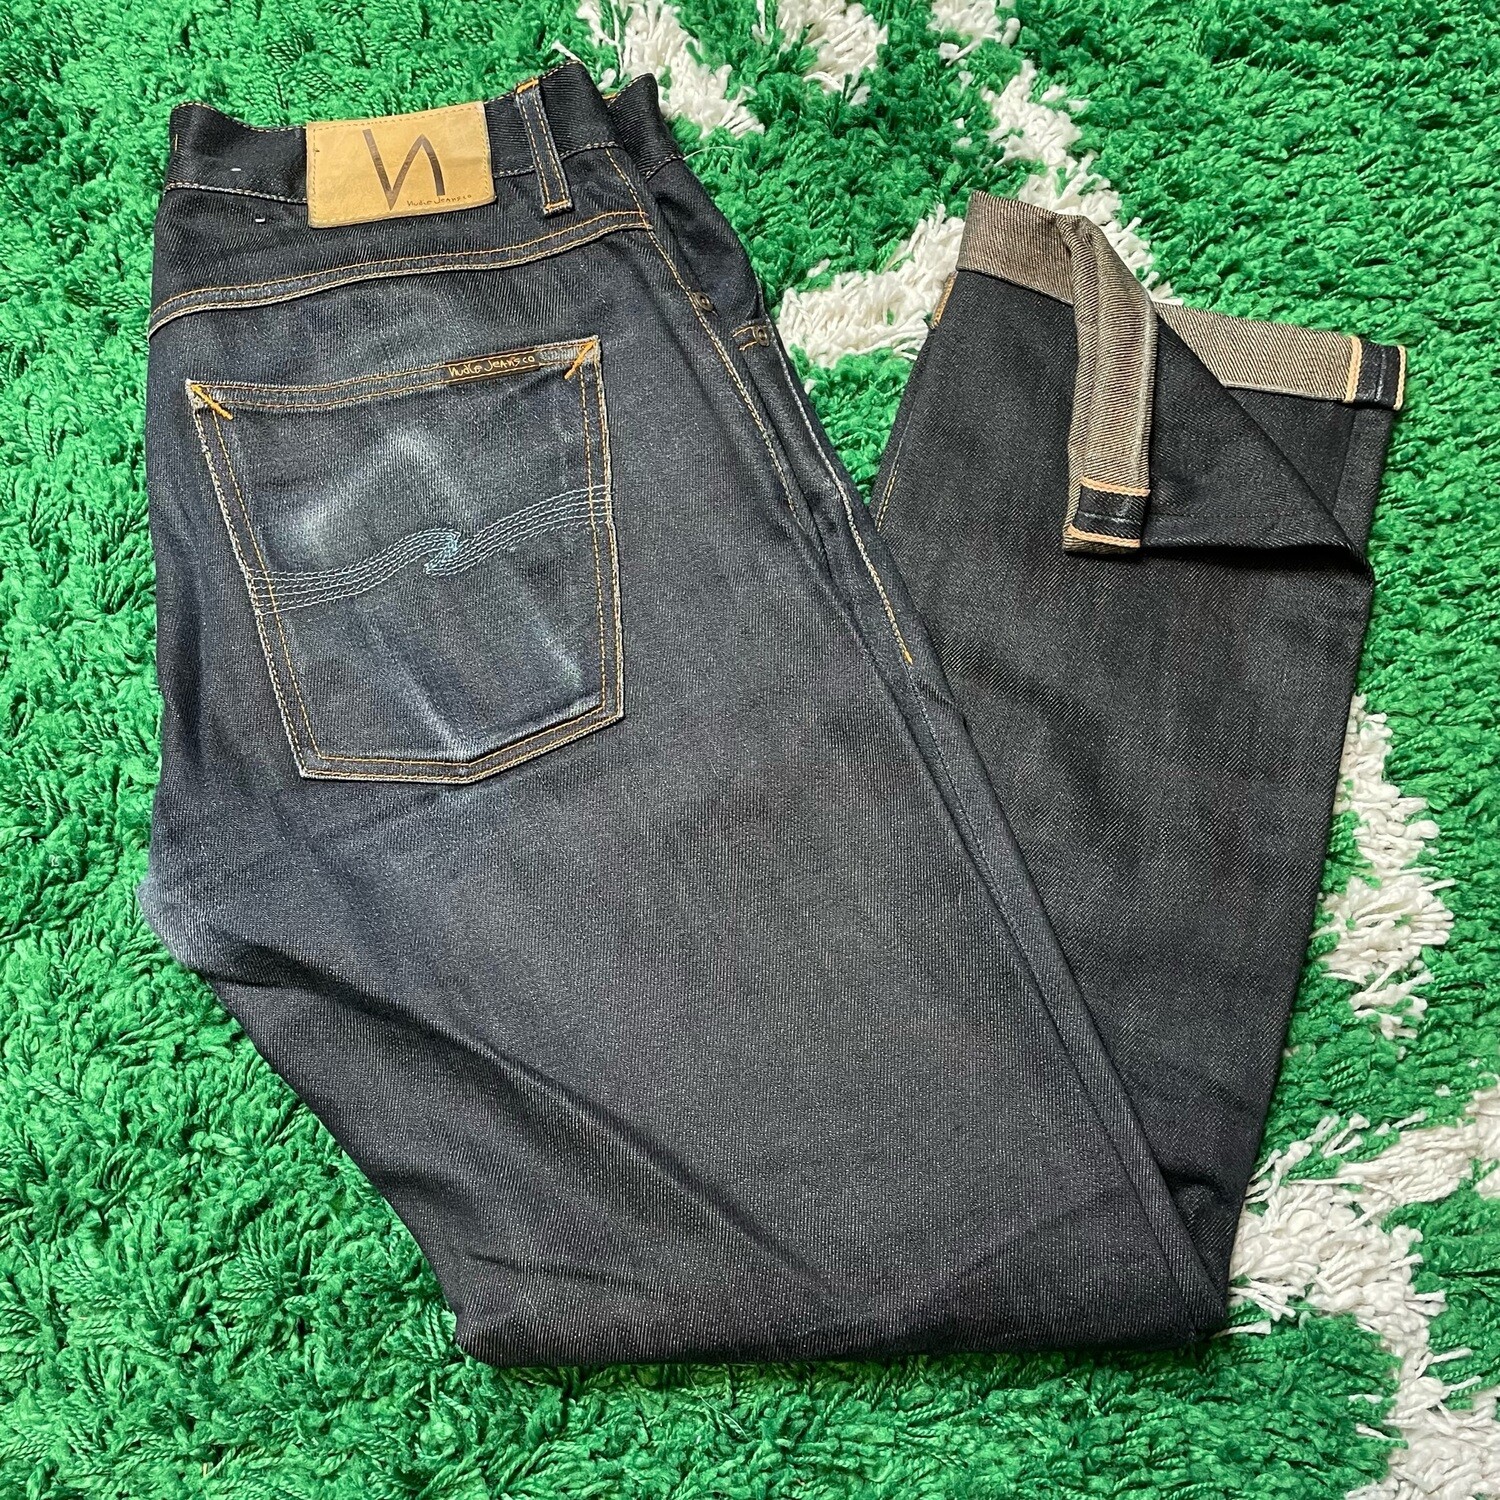 Nudie Jeans Dry Selvage Size 32x32